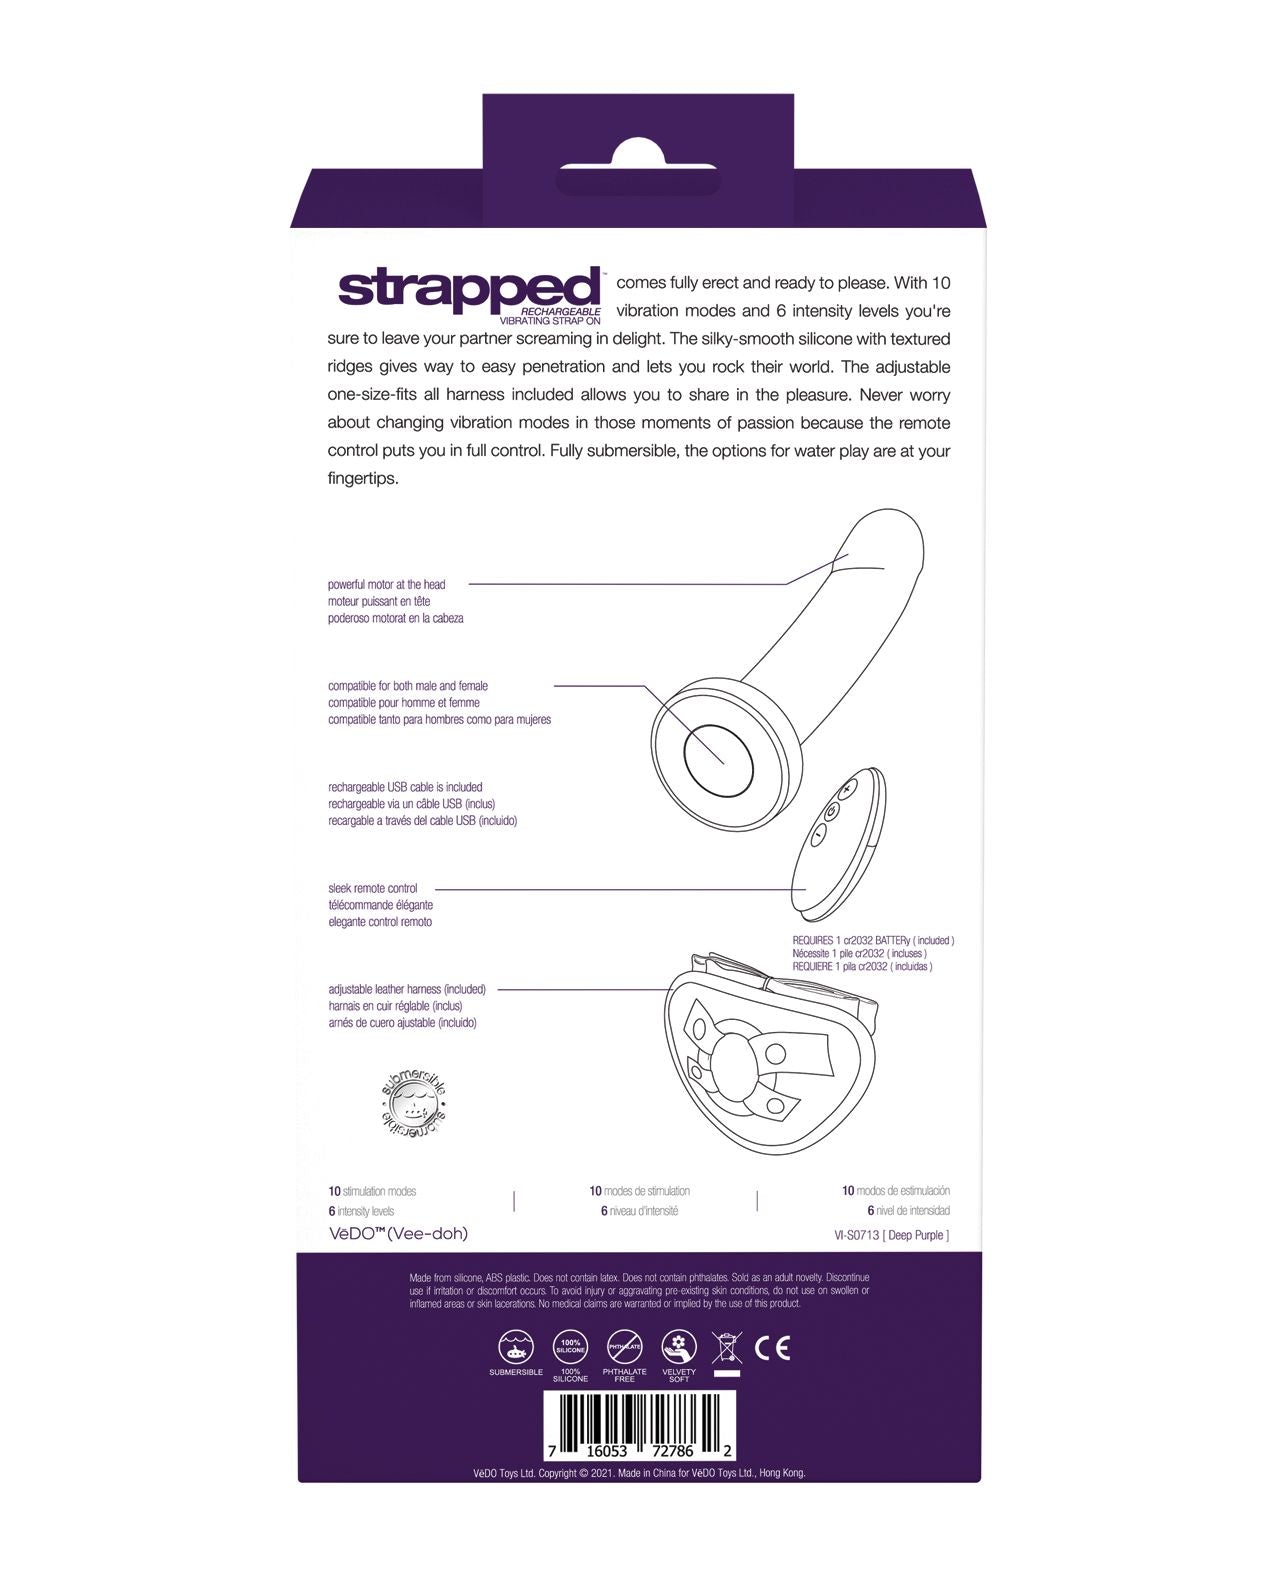 Back of the Strapped box (purple).